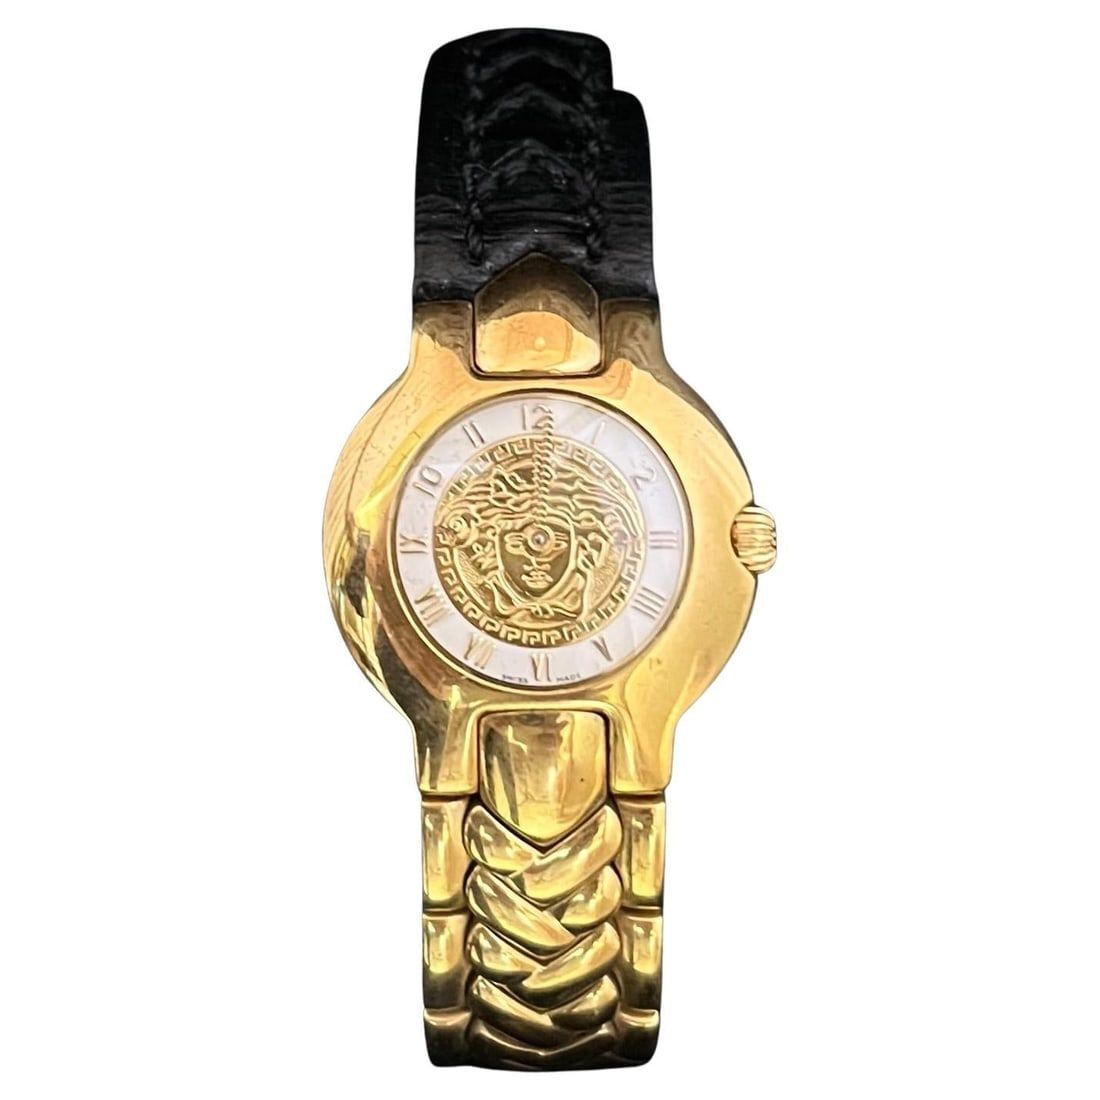 Gianni Versace 18K gold limited edition Medusa watch, number 104 of 500, estimated at $6,000-$7,000 at Jasper52.